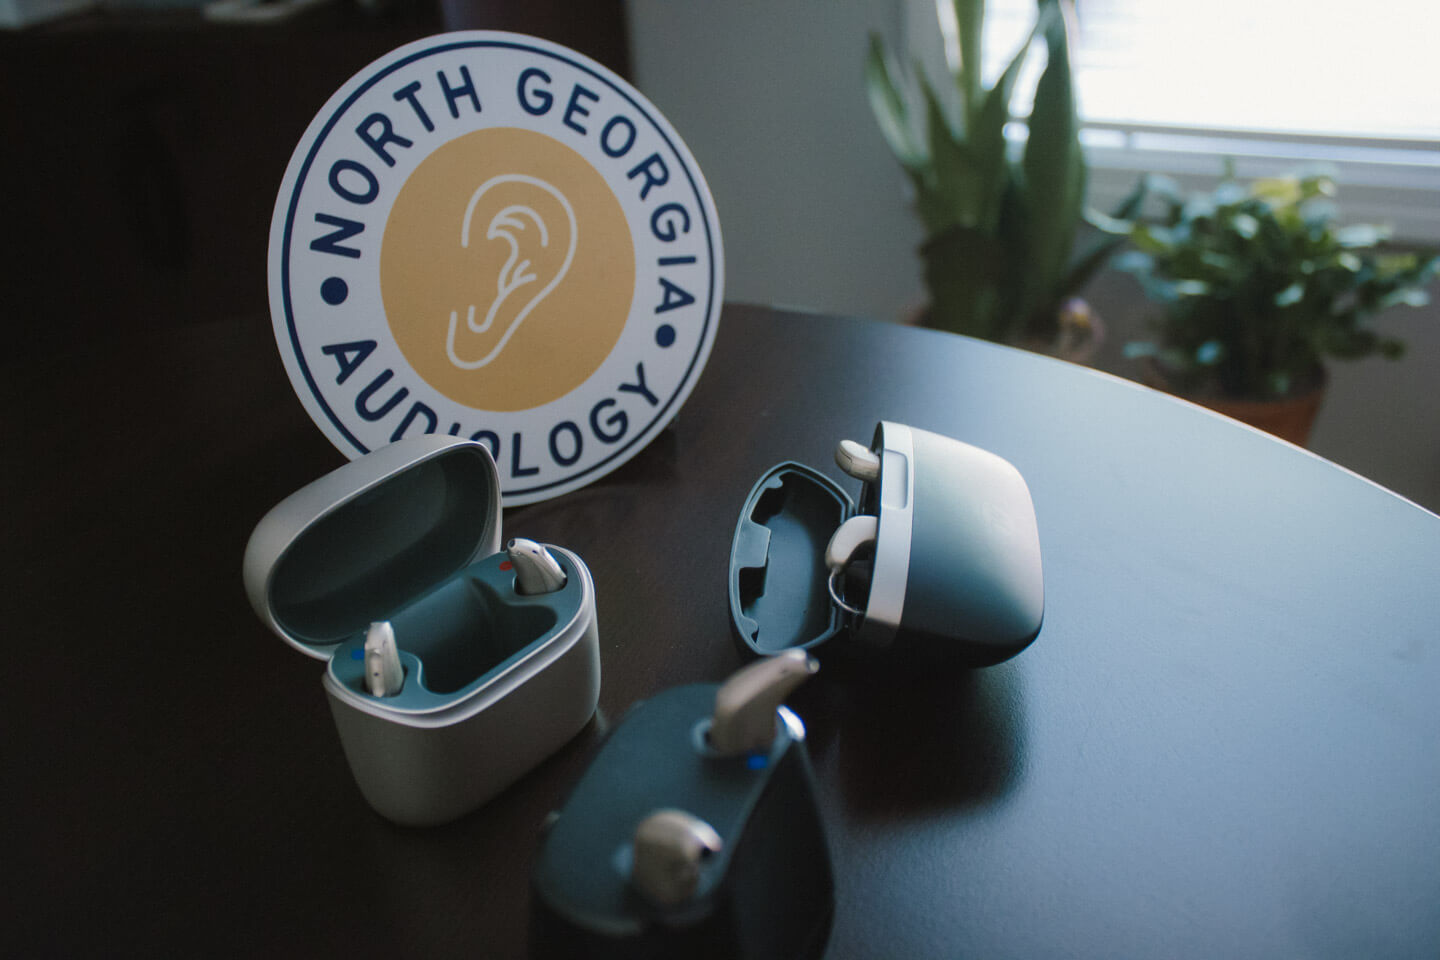 3 types of hearing aids on a table in their cases with a sign that says North Georgia Audiology in the background